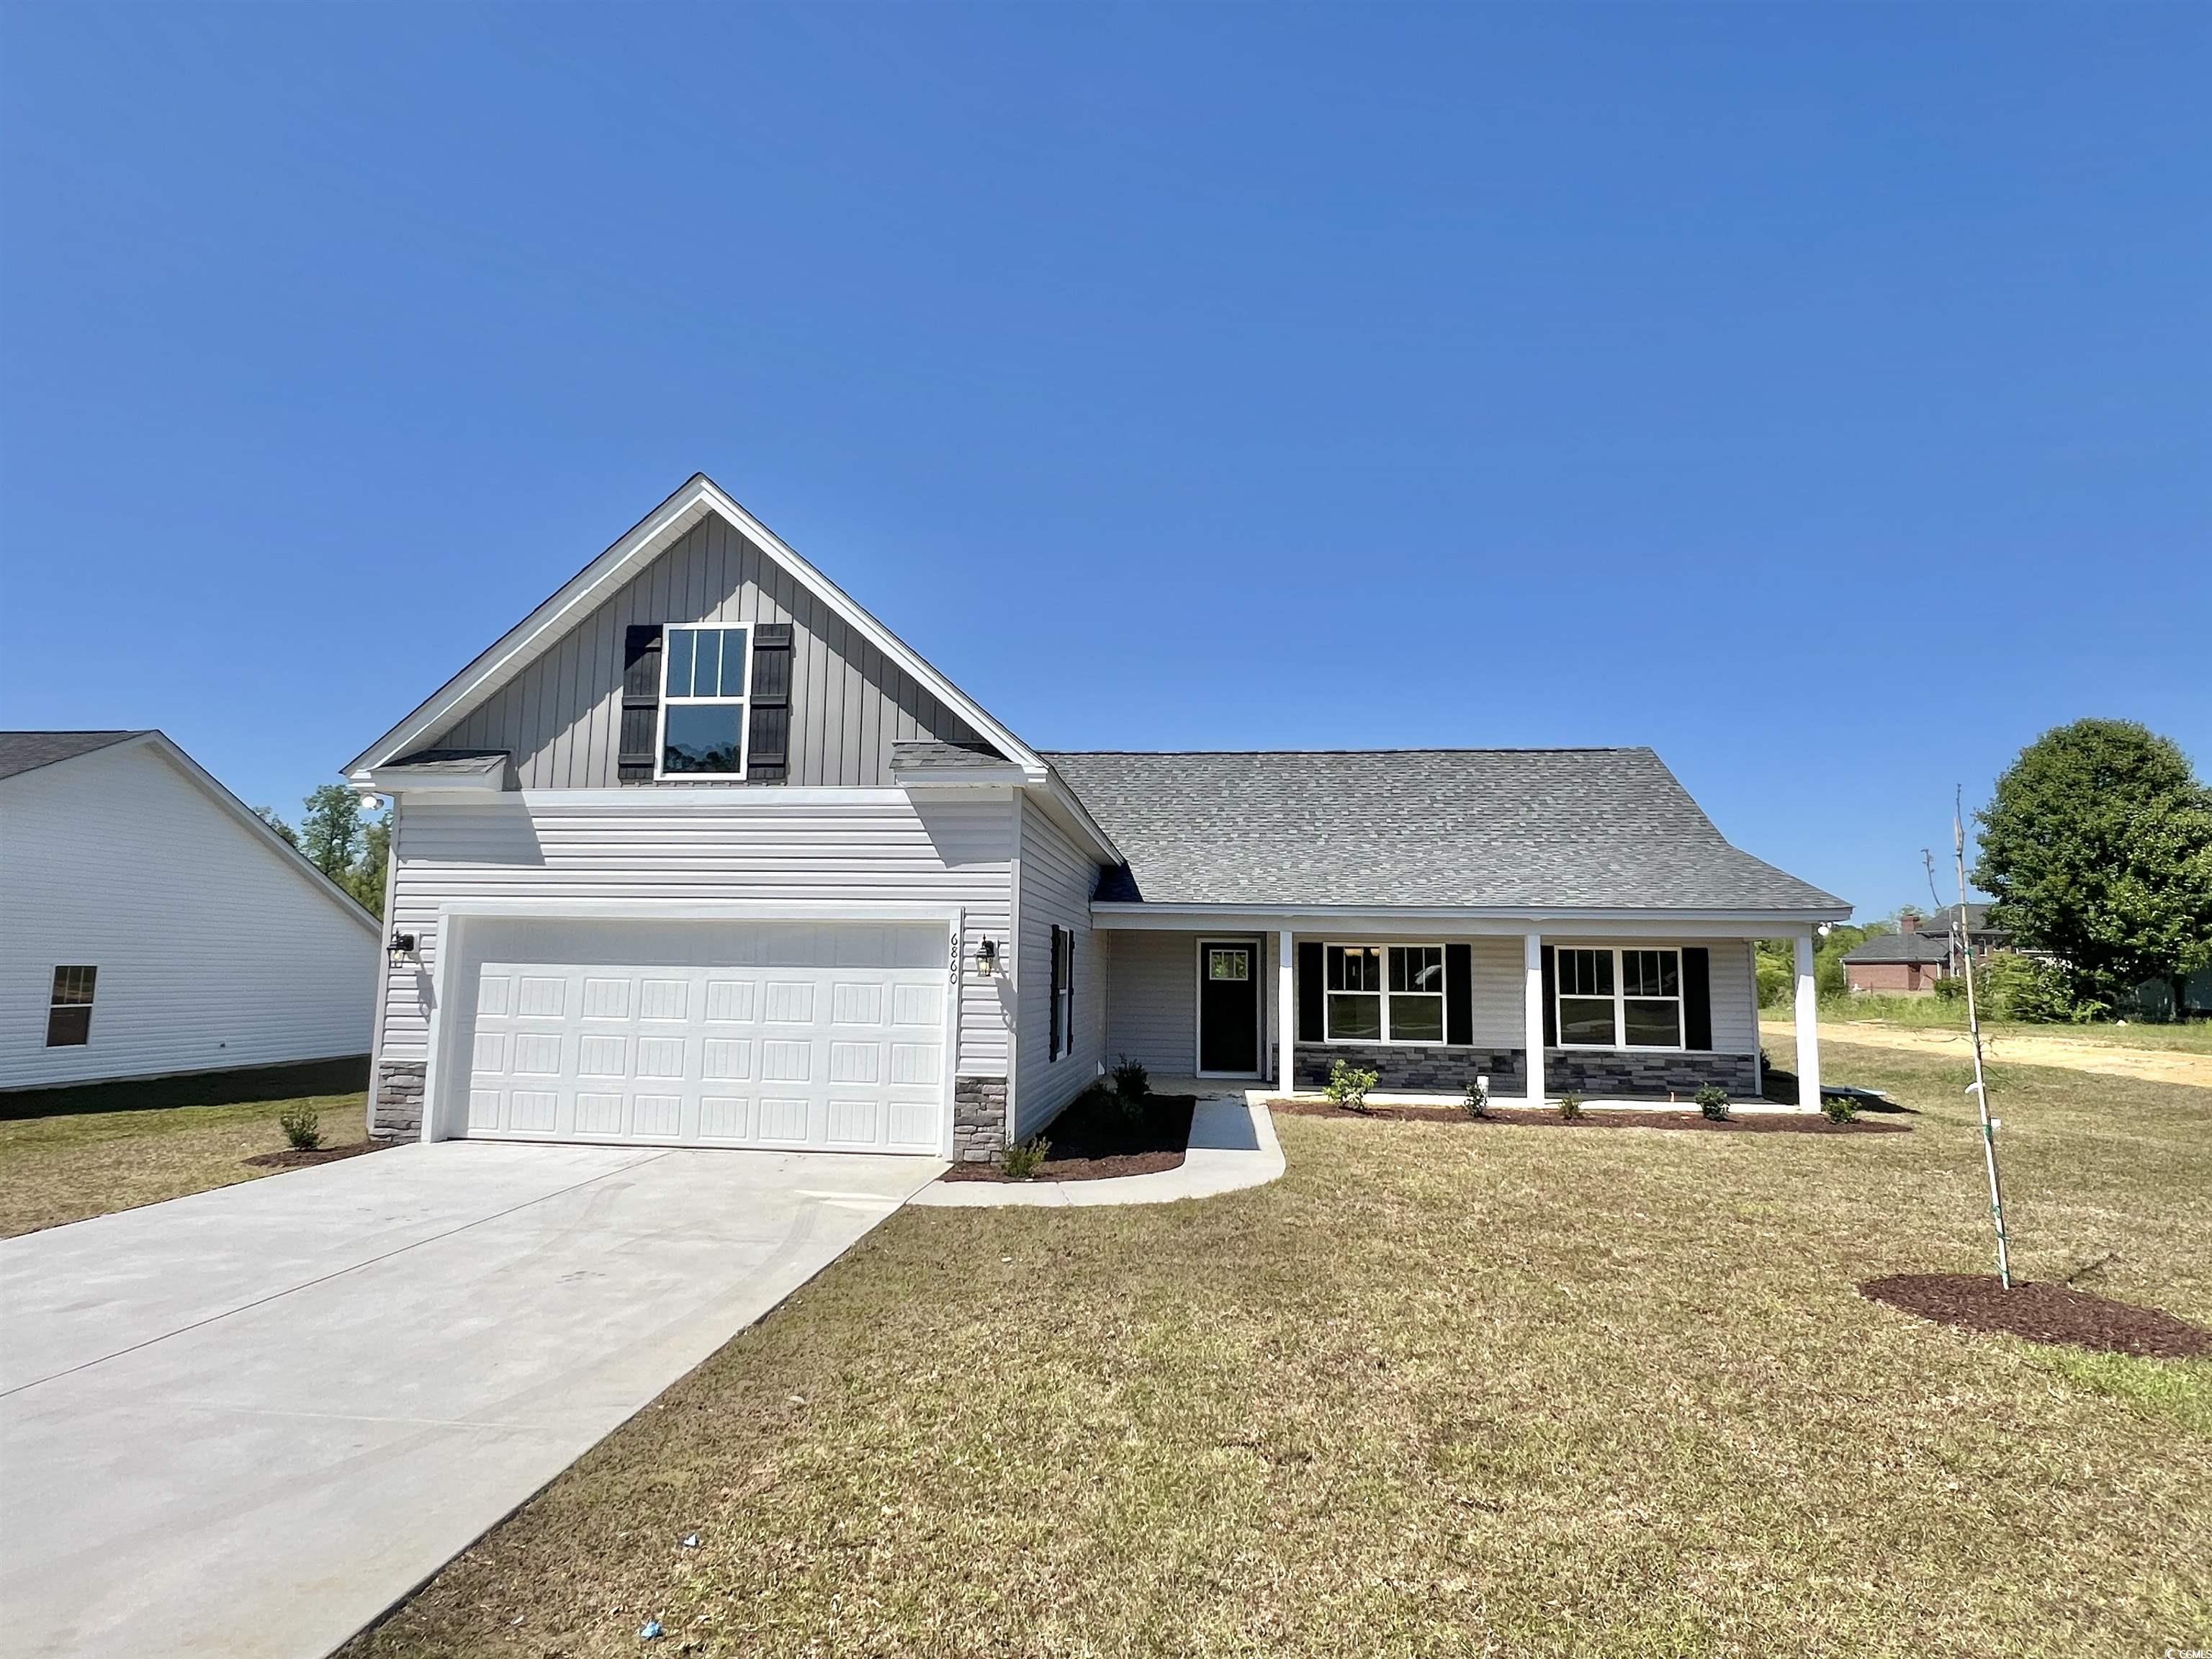 **move in ready** new construction, 4br/3bath home on 1/2 acre lot!! have you been looking for a new, no hoa home on a large lot close to the beach, but away from the hustle and bustle??? if so, this beauty is the one!!! bring your rv, boat, utility trailer, and install your pool and detached building. this yard can accommodate it all!!! this well-appointed home features huge front & rear porches, upgraded wood-look laminate flooring in the great room, dining area, and entry/hallway, granite countertops in the kitchen, tile flooring in the bathrooms, laundry and kitchen, double vanity and 5' custom tile walk-in shower in the master bath, vaulted ceilings & ceiling fans in living room and all the bedrooms, and an irrigation system to keep your yard green during the summer months. this home has a very peaceful setting in conway yet offers a short drive to all the grand strand has to offer. as the new owner of this gorgeous home you'll never be far away from golfing, fishing, dining, shopping... sand, sun and fun!!!